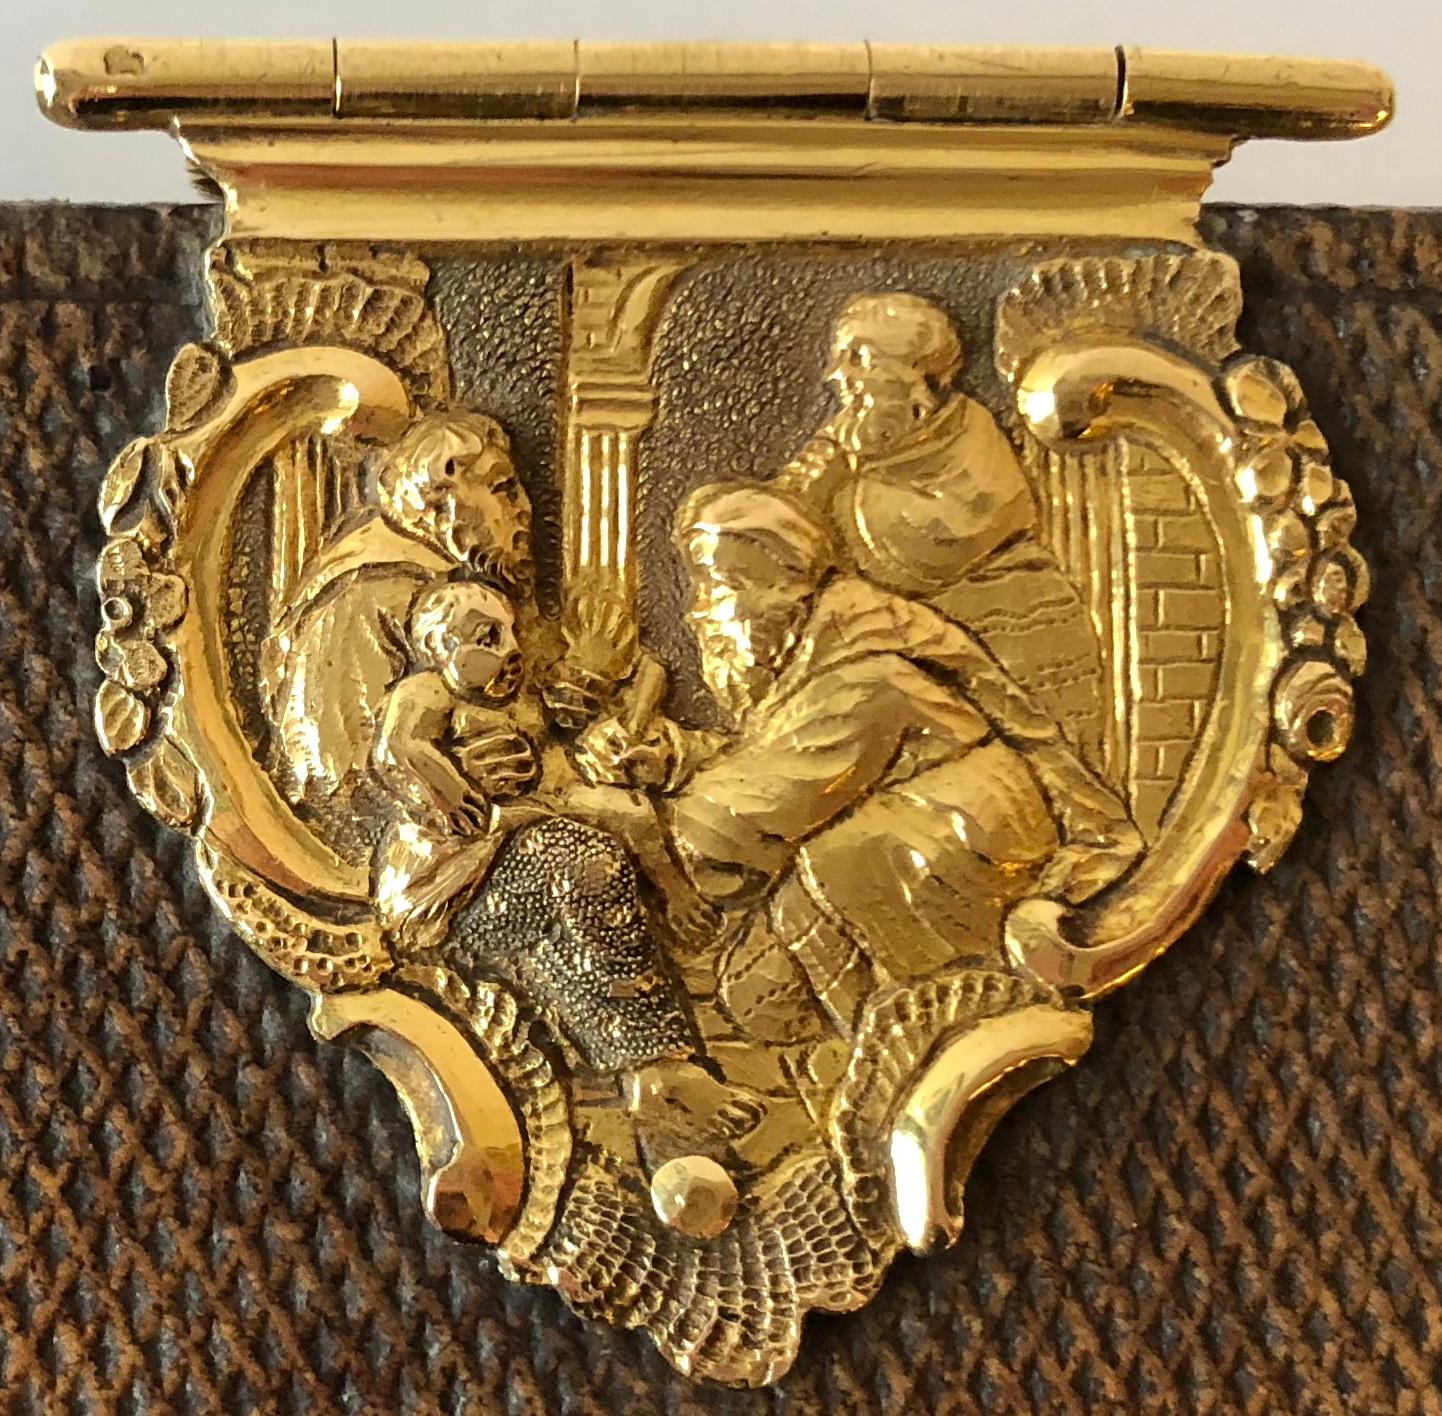 Late 18th Century Dutch Bible with Gold Bookclasps